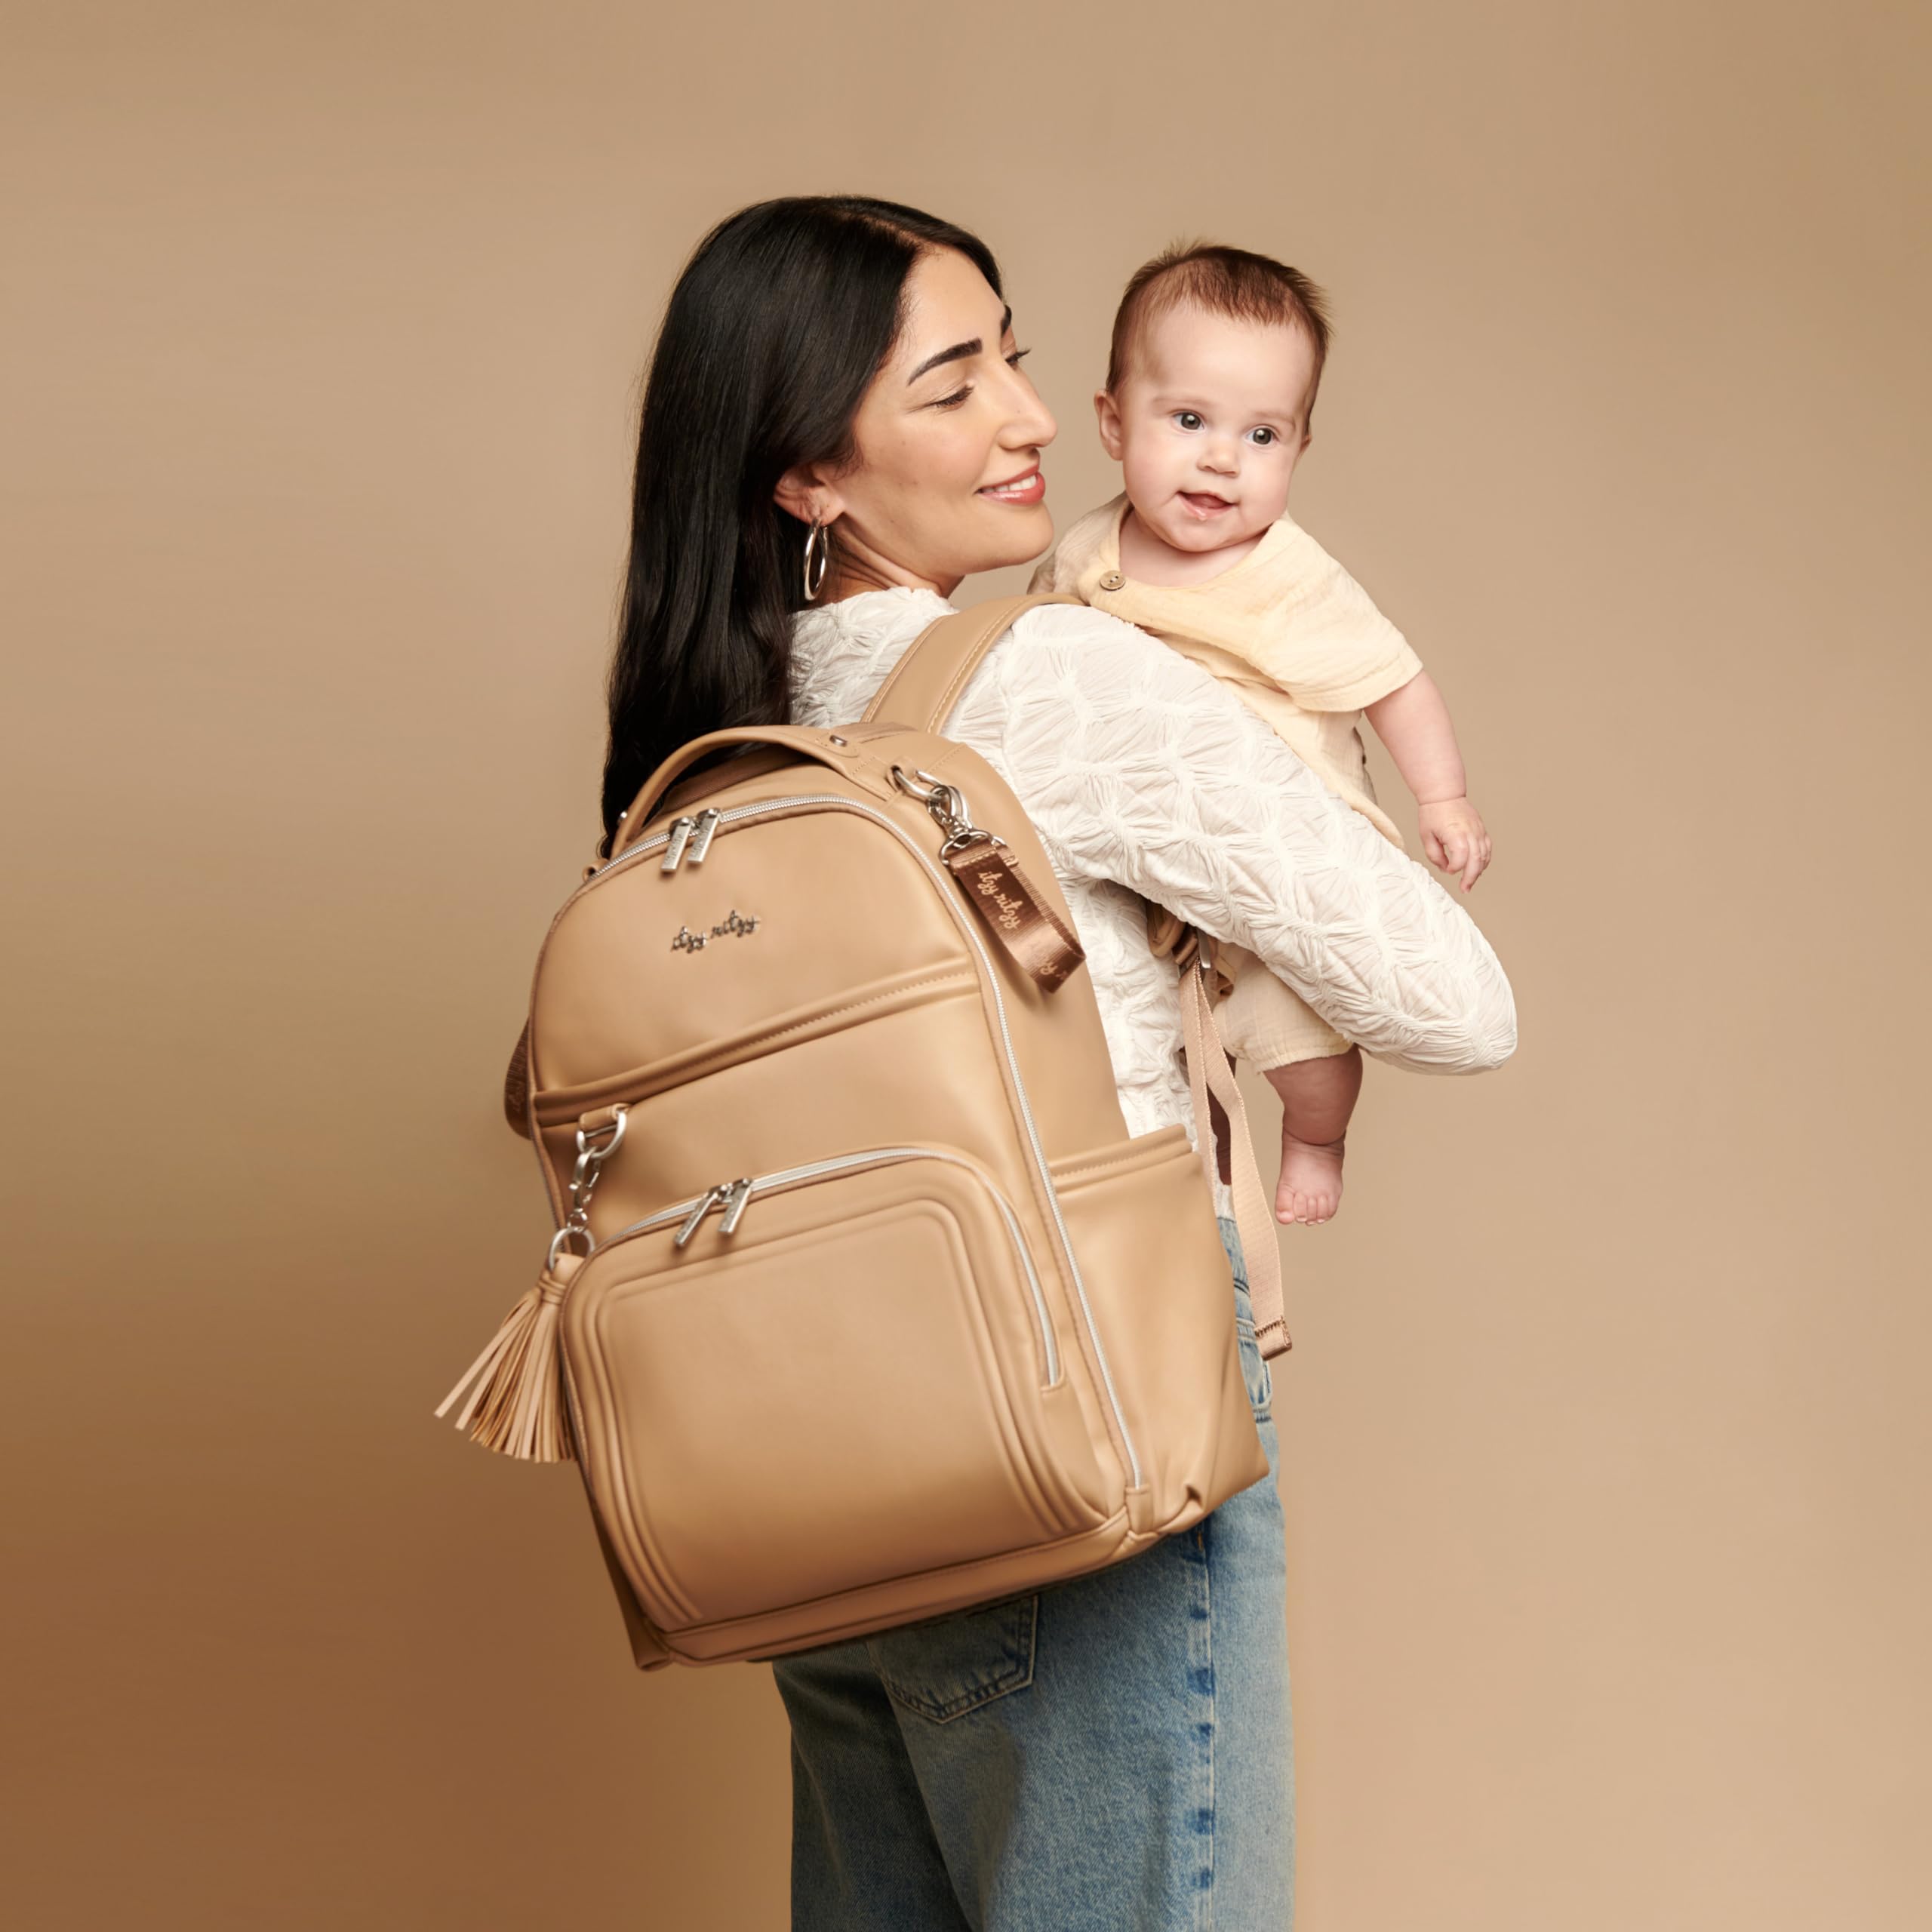 Itzy Ritzy Unisex Baby Backpack